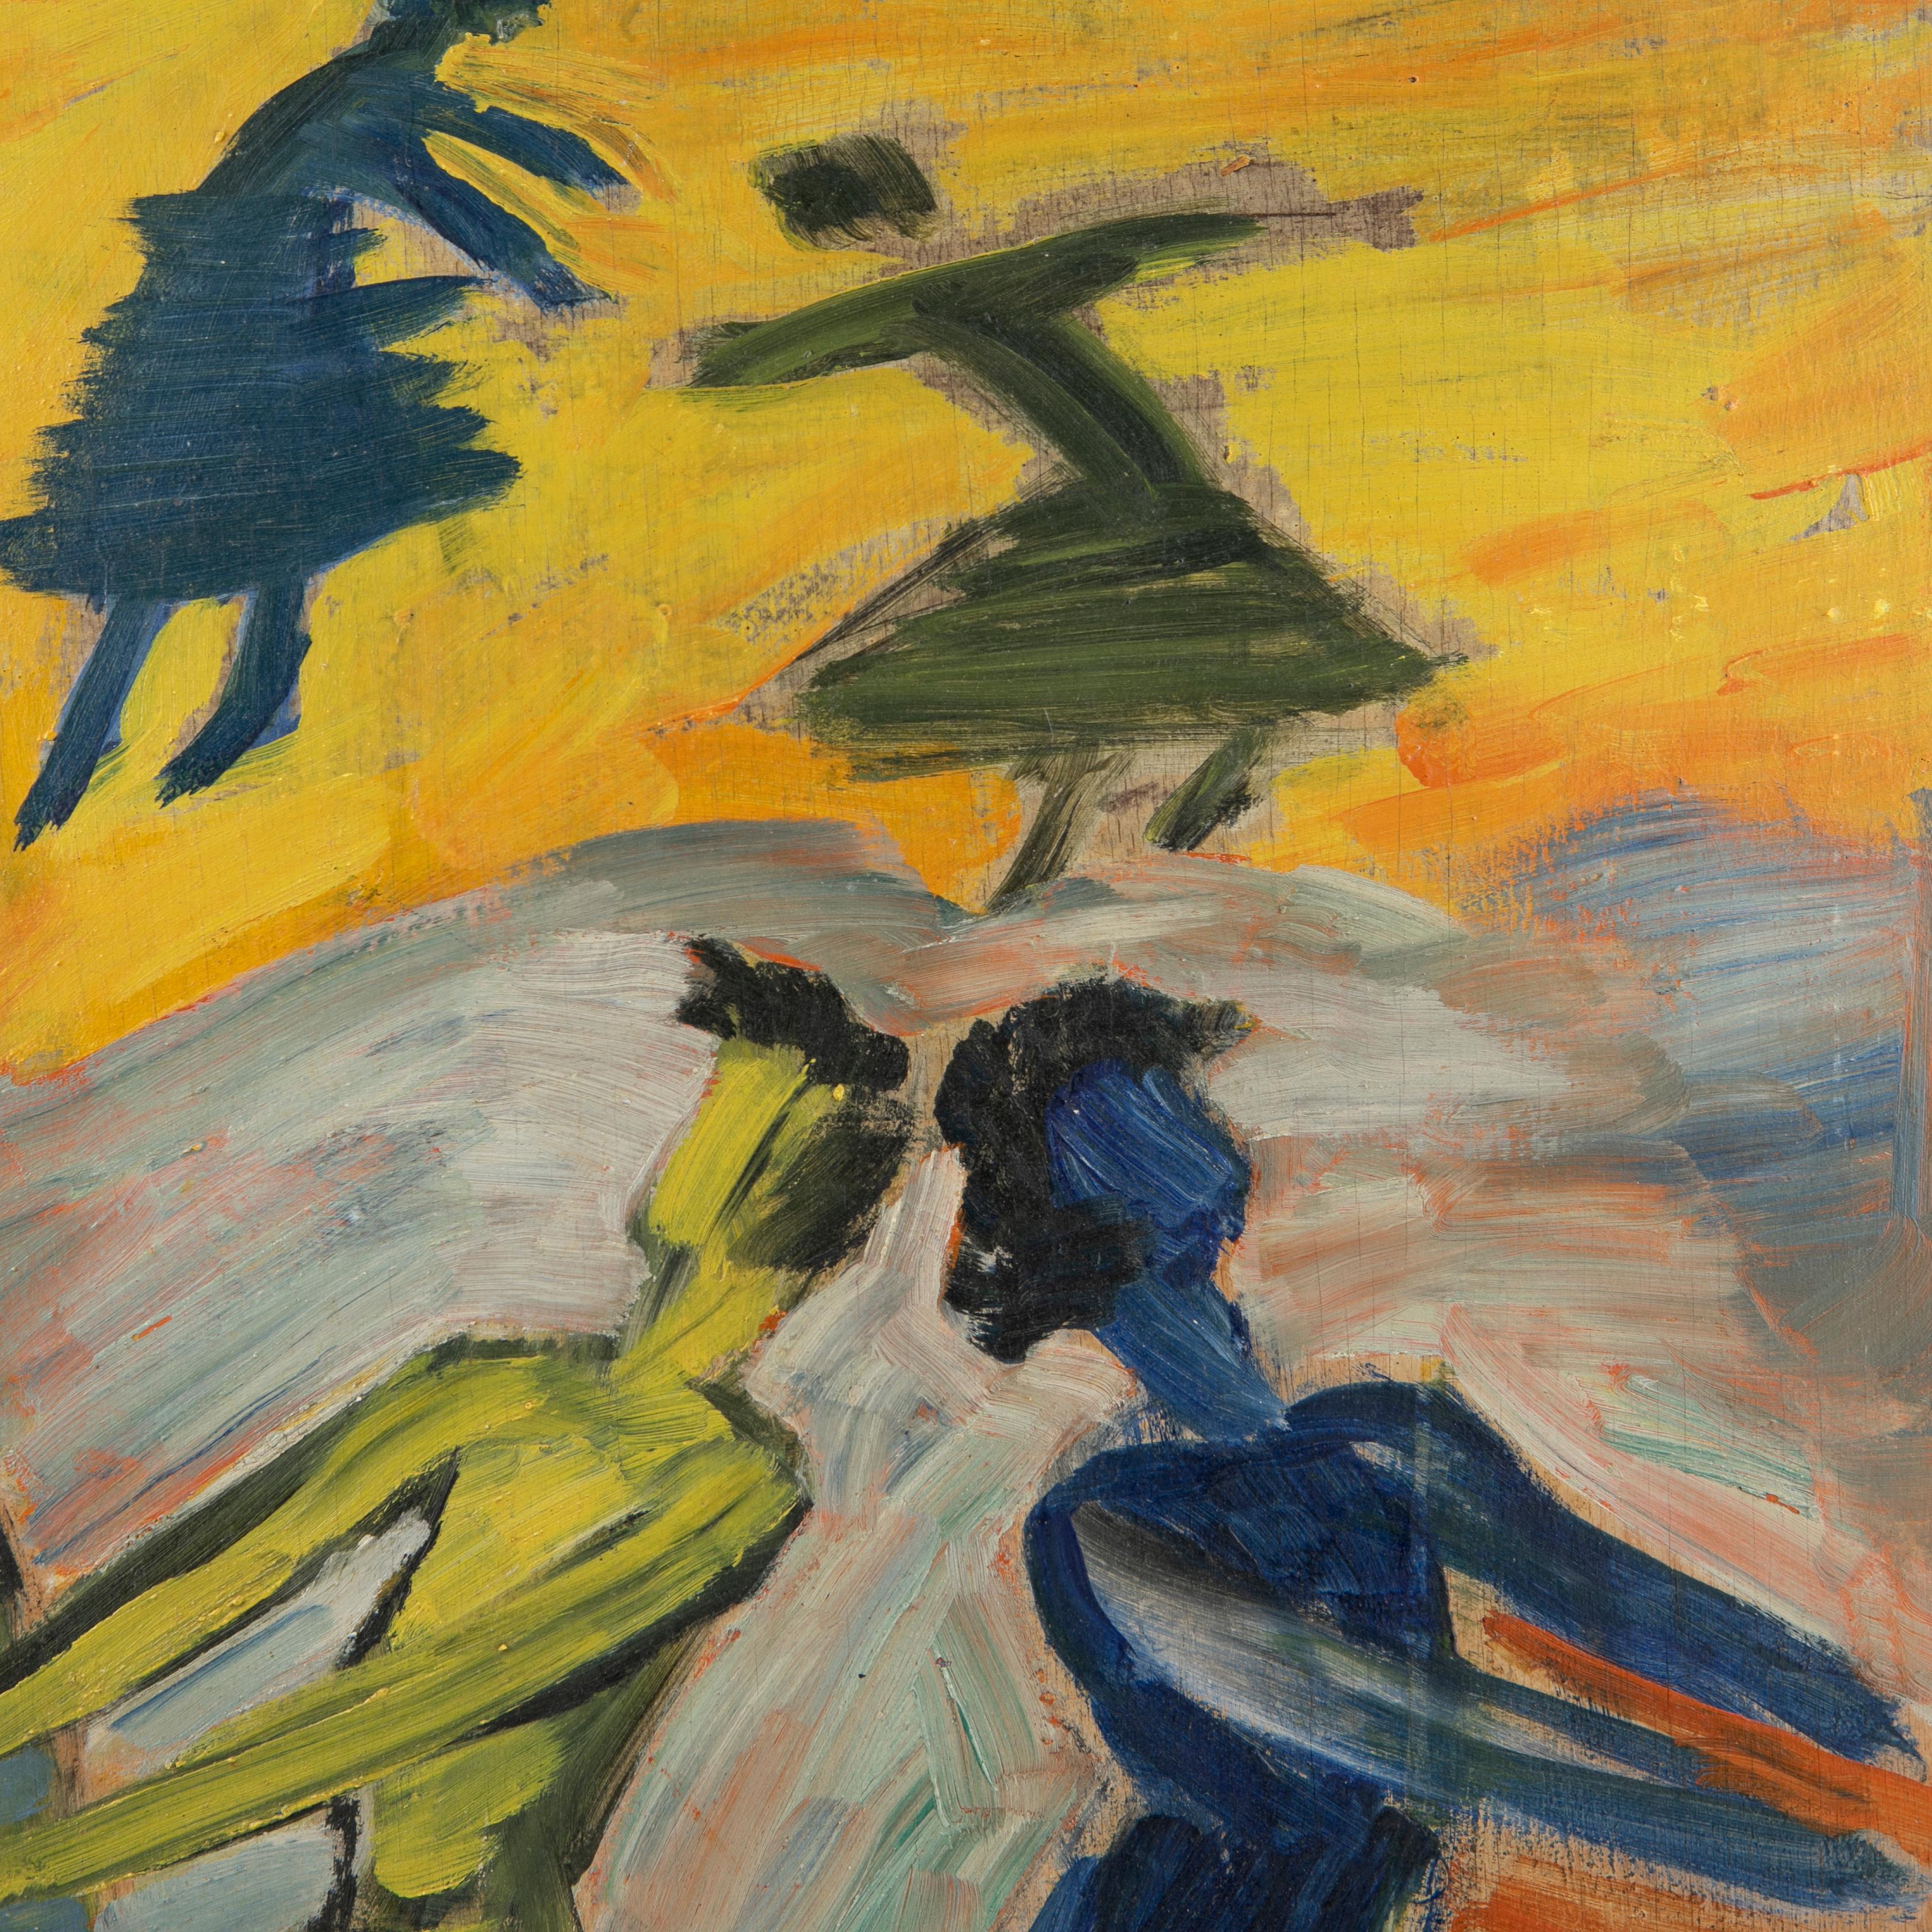 Painted Painting By Olivia Holm-Møller  'Dancing Women' For Sale